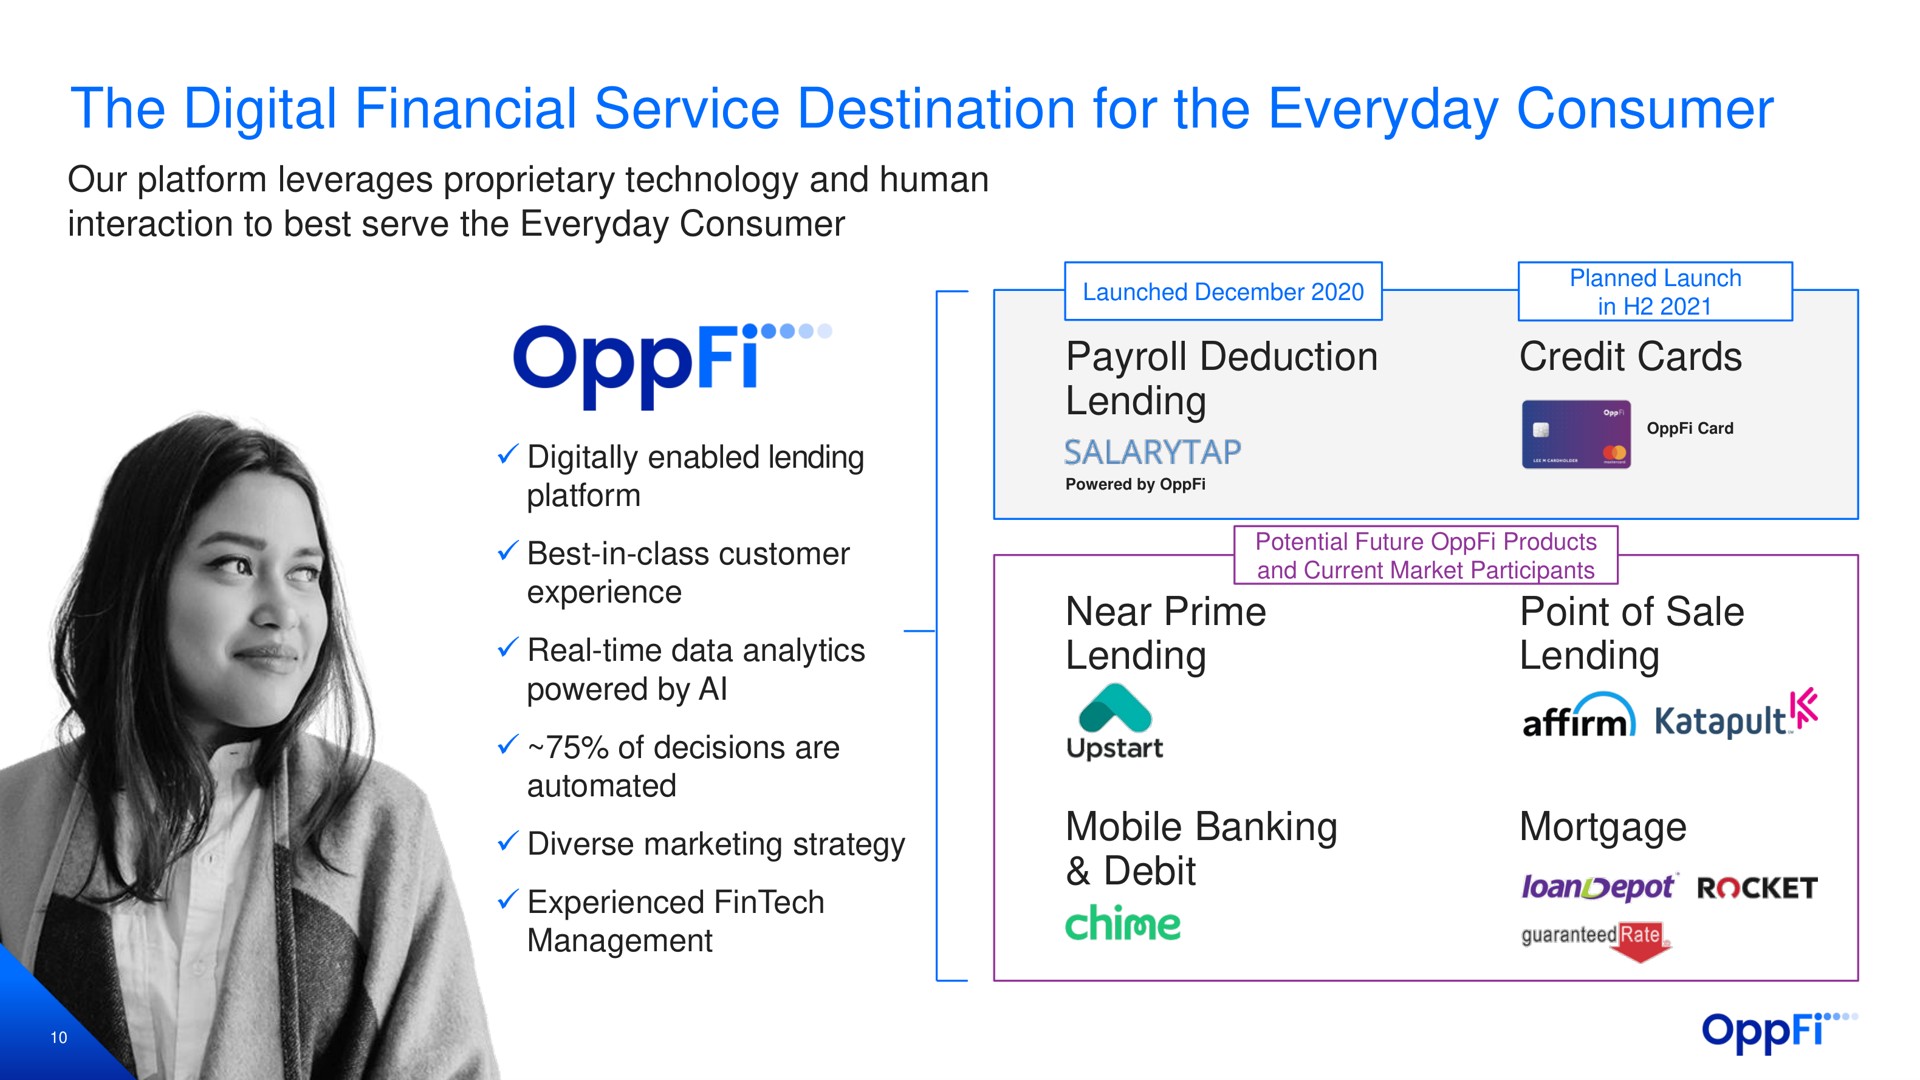 the digital financial service destination for the everyday consumer our platform leverages proprietary technology and human interaction to best serve the everyday consumer payroll deduction lending credit cards near prime lending point of sale lending mobile banking debit mortgage digitally enabled lending platform best in class customer experience real time data analytics powered by of decisions are diverse marketing strategy experienced management | OppFi